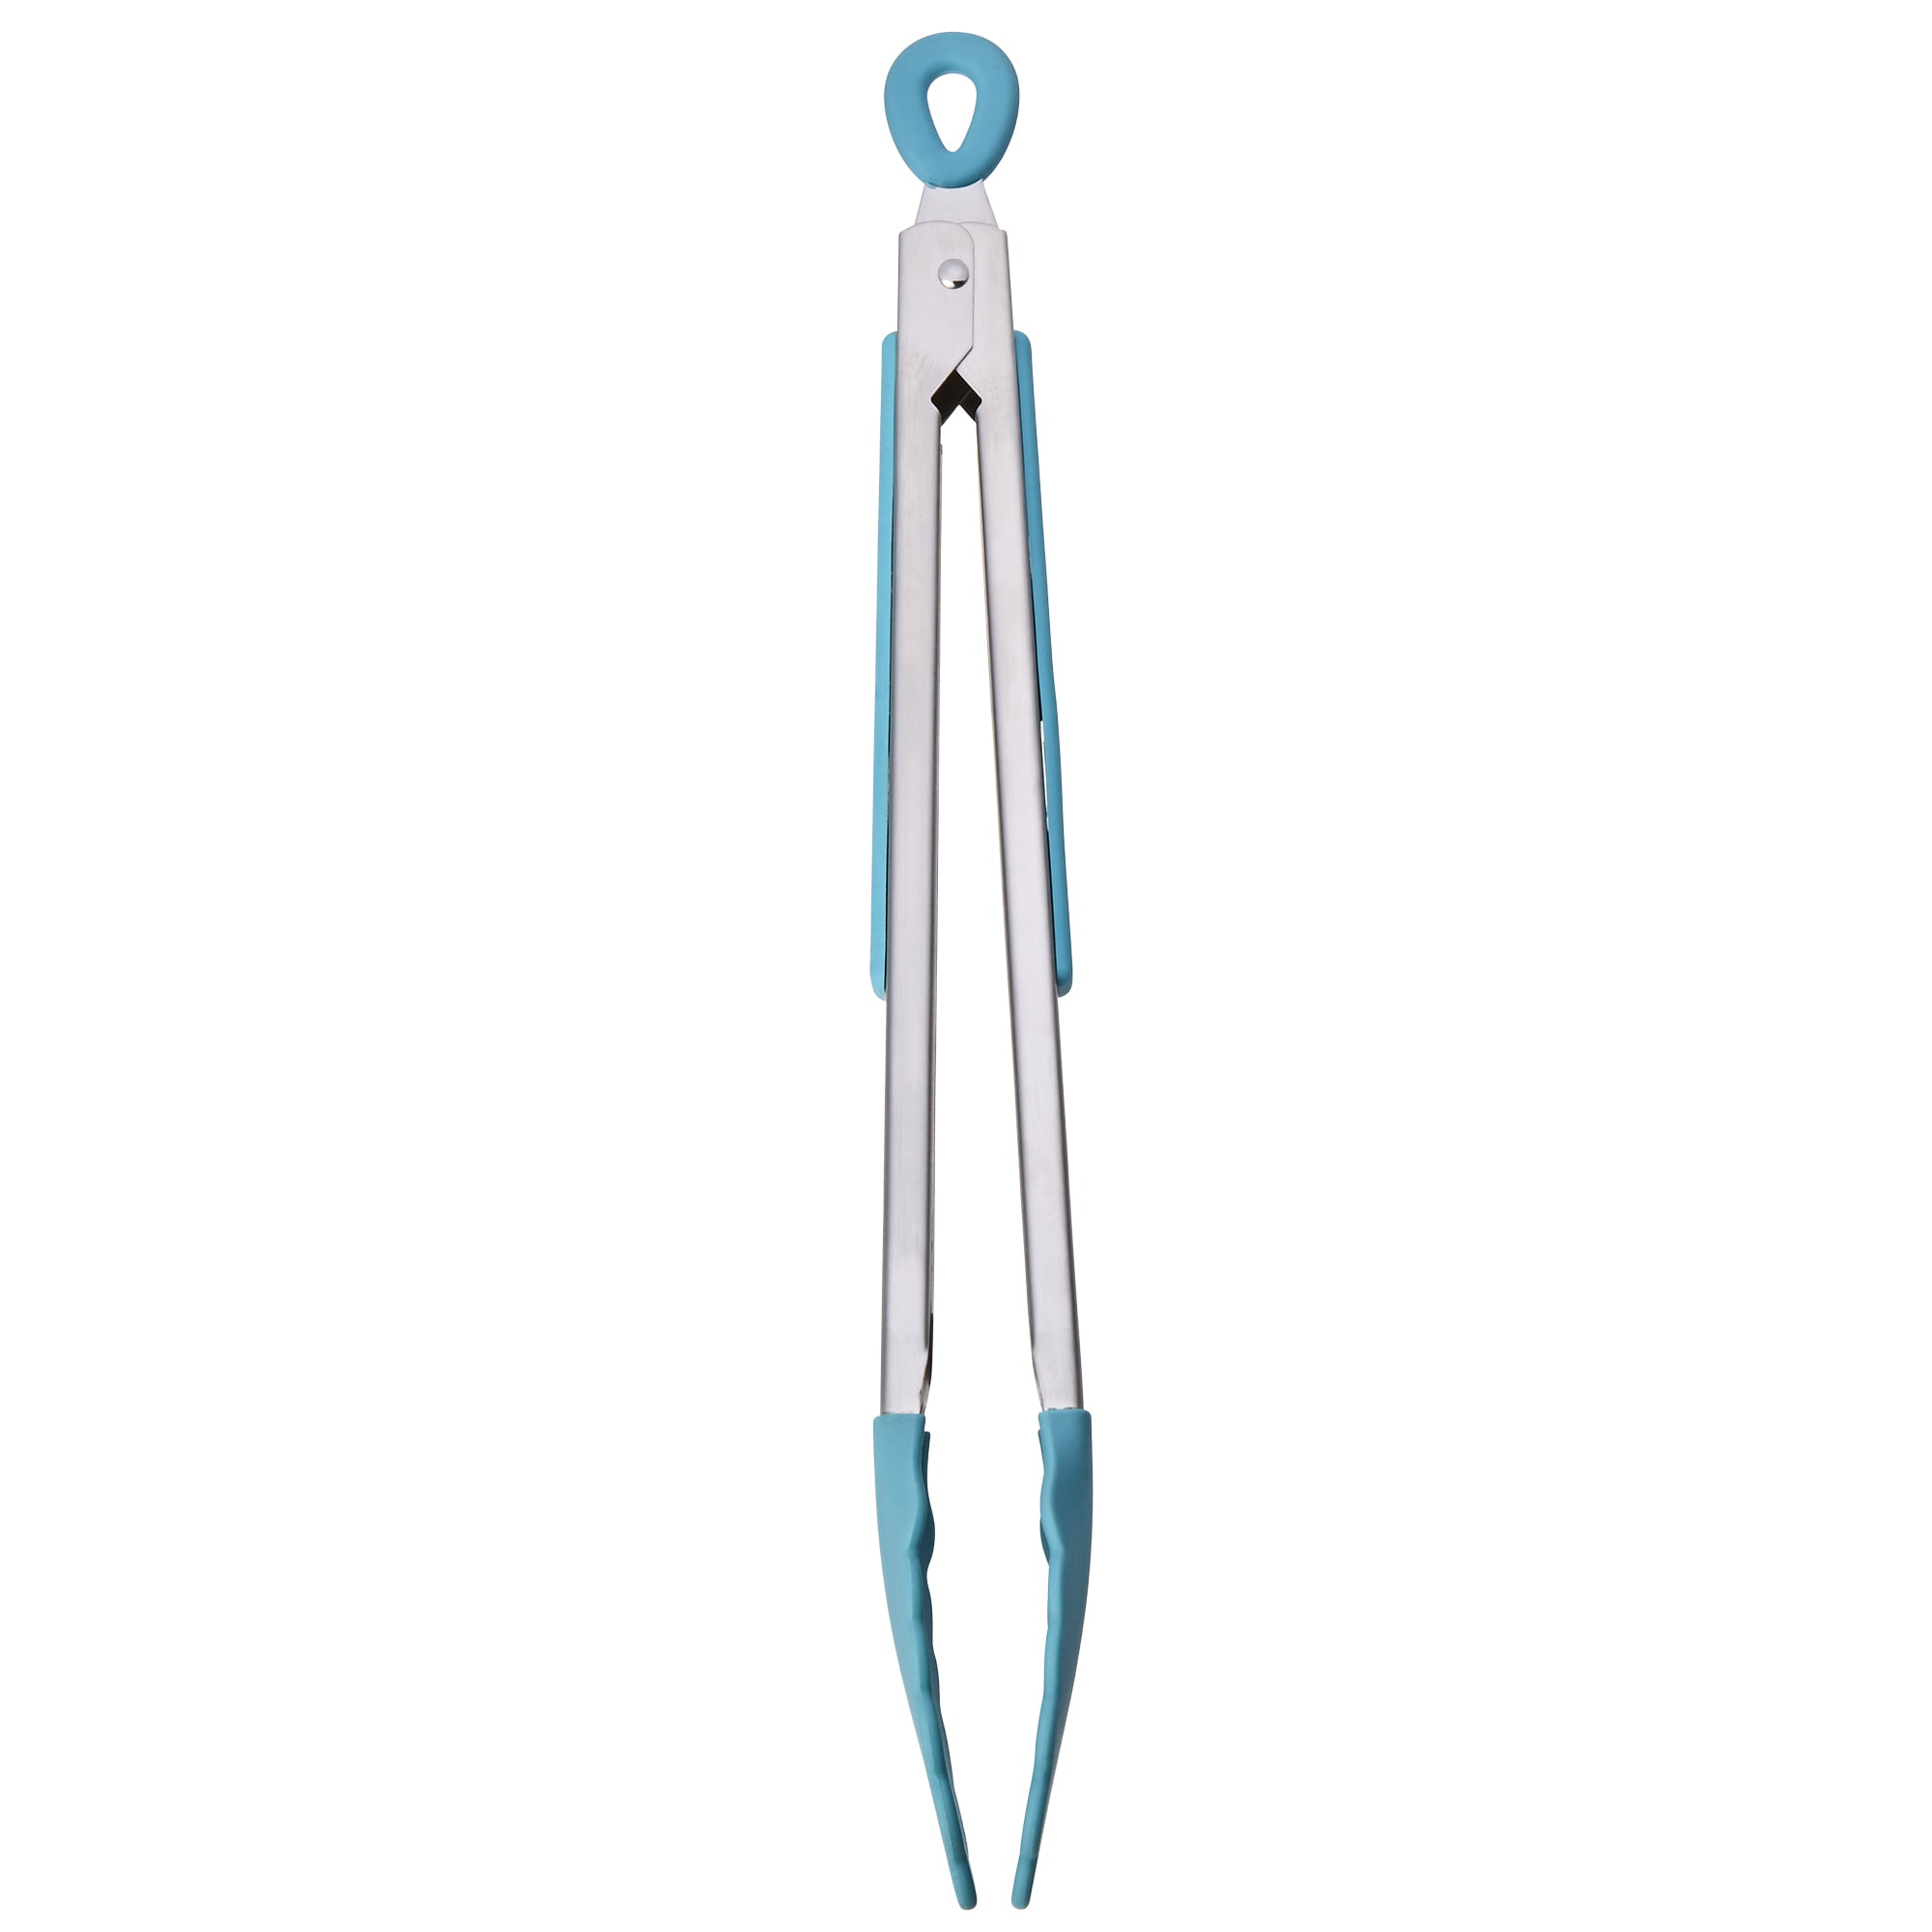 Product: Cole-Parmer Essentials Stainless Steel Tongs with Silicone Tips;  12 from Environmental Express